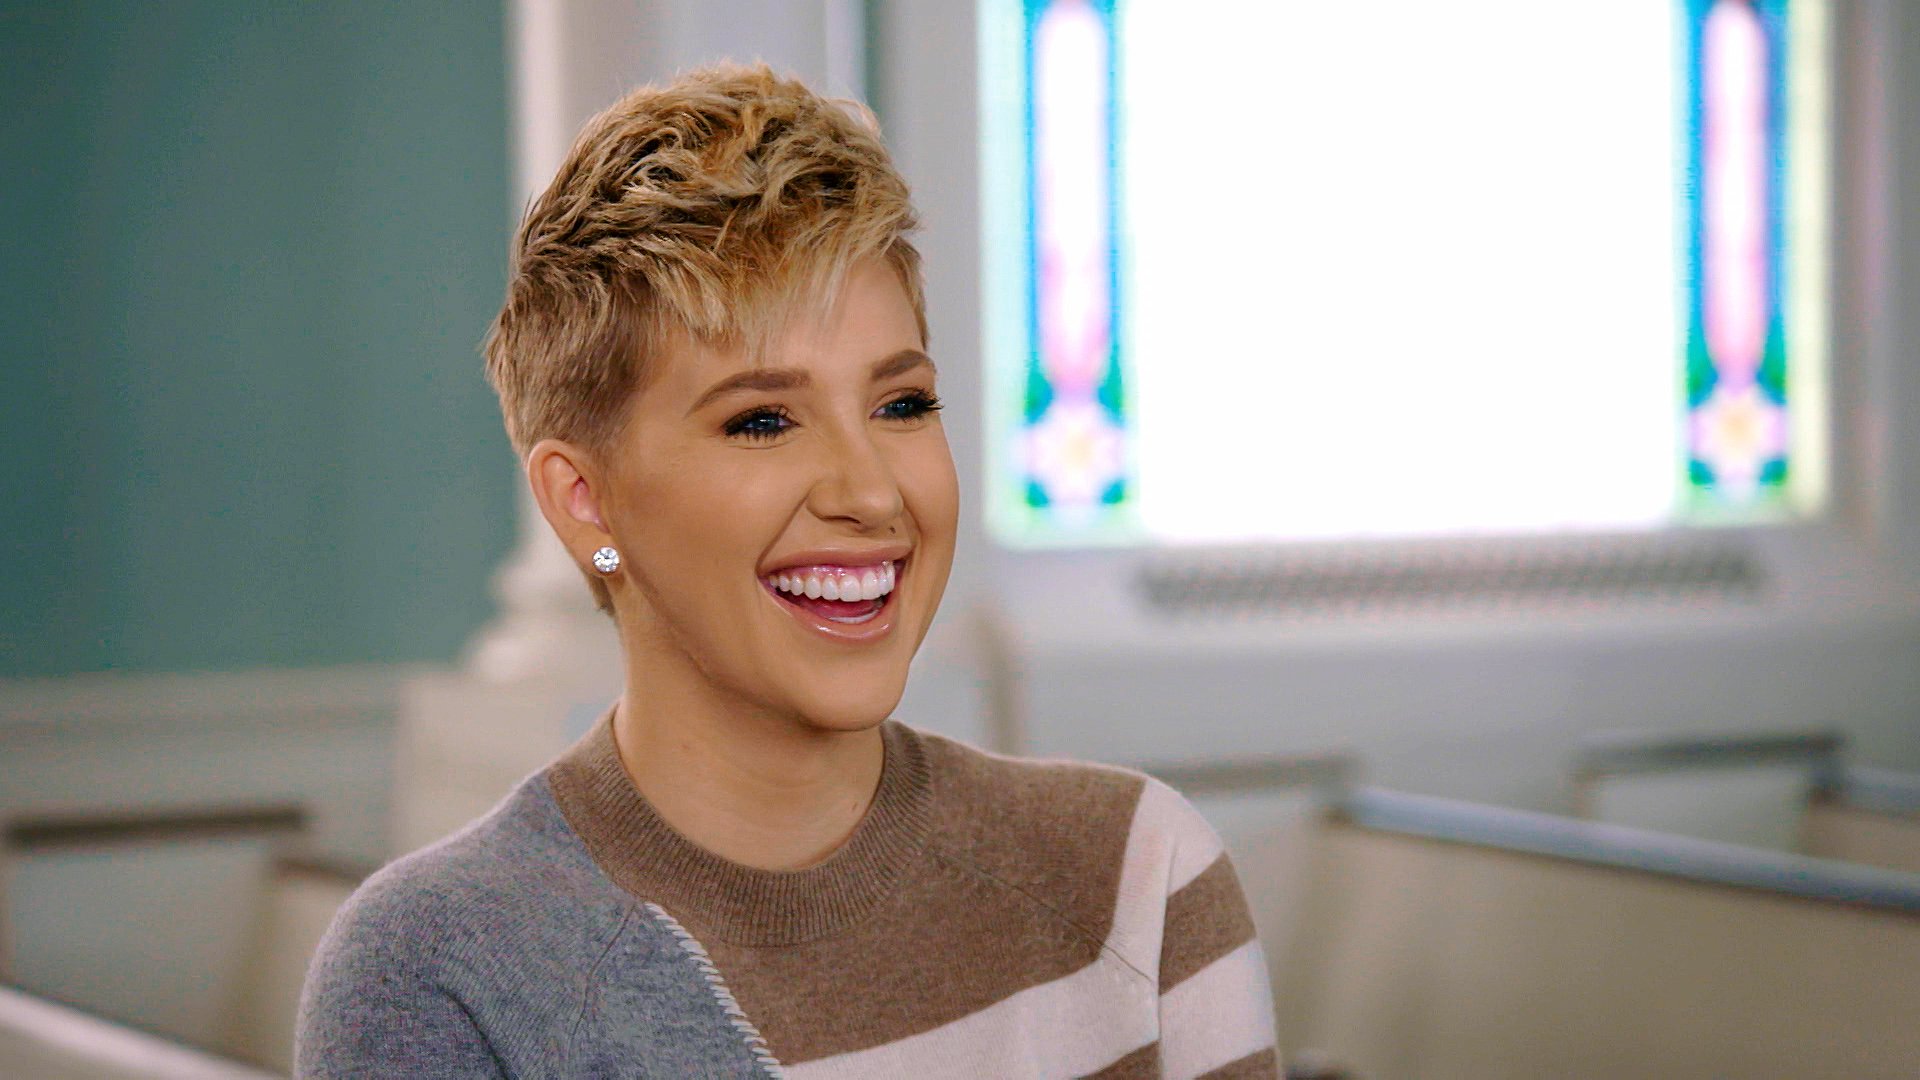 Chrisley Knows Best -- "Grandma Theft Auto" Episode 801 -- Pictured in this screengrab: Savannah Chrisley | Photo: Getty Images